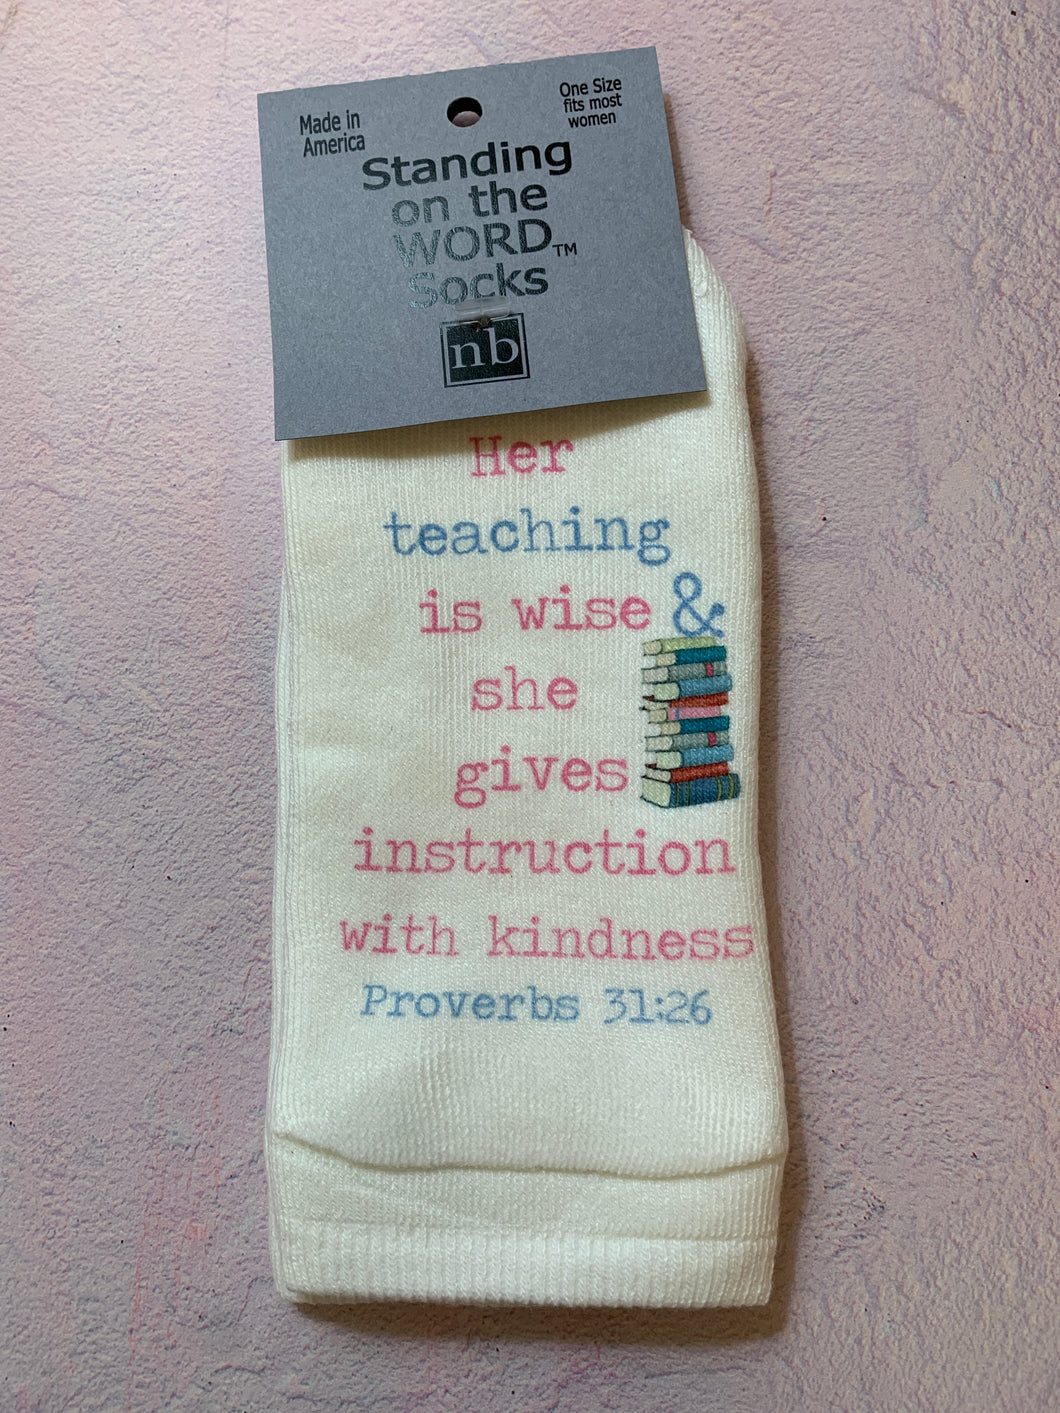 Her teaching is wise...- Standing on the Word Socks